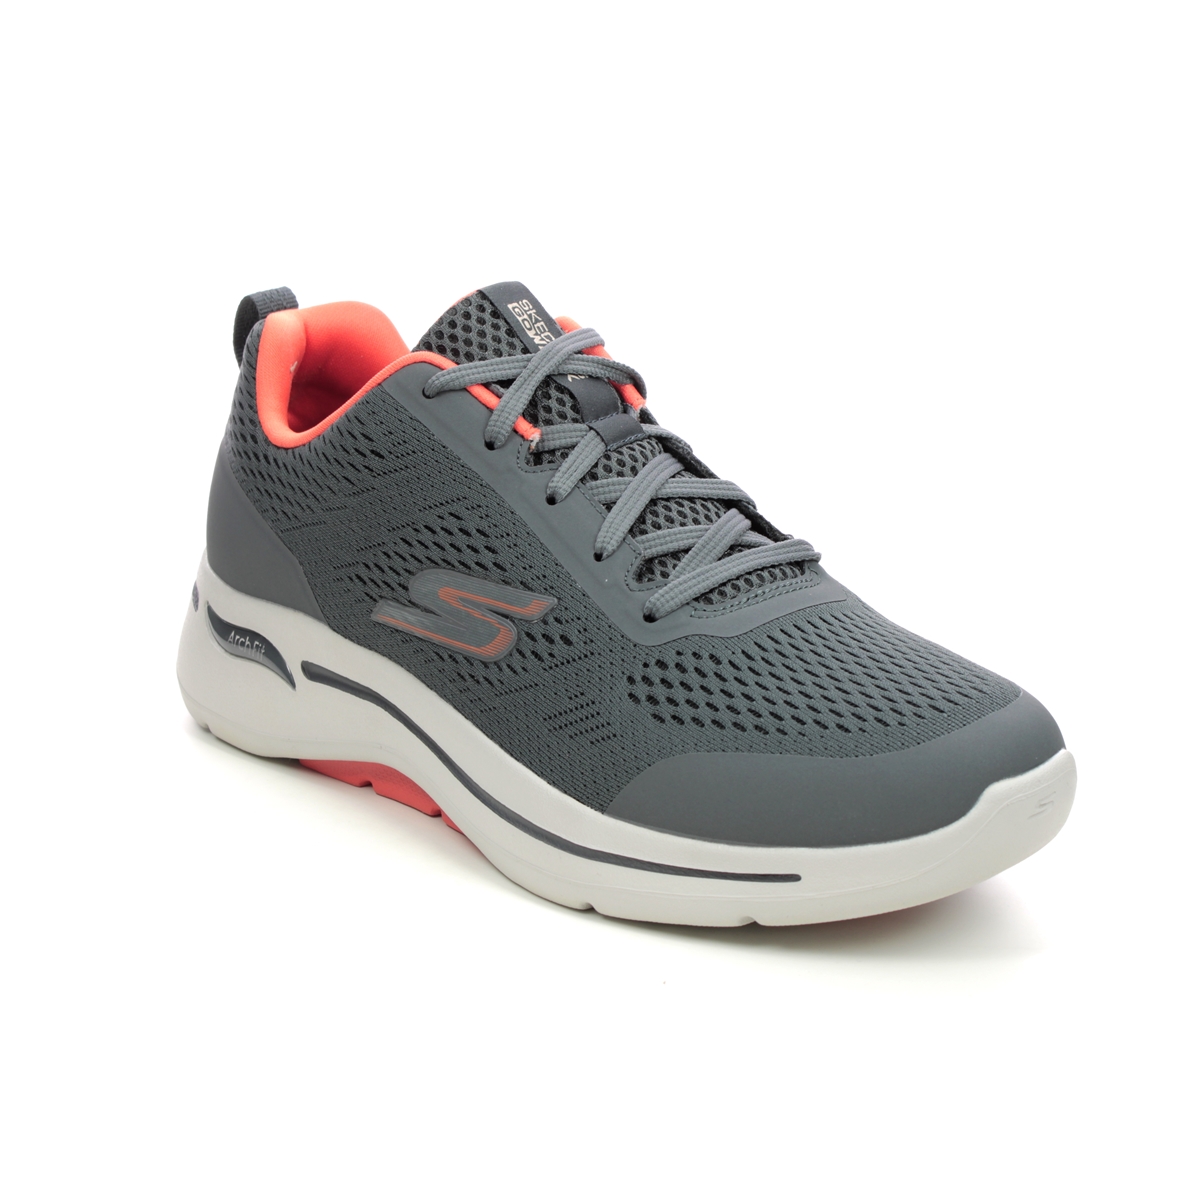 Skechers Arch Fit Go Walk Charcoal Grey Mens Trainers 216116 In Size 7 In Plain Charcoal Grey